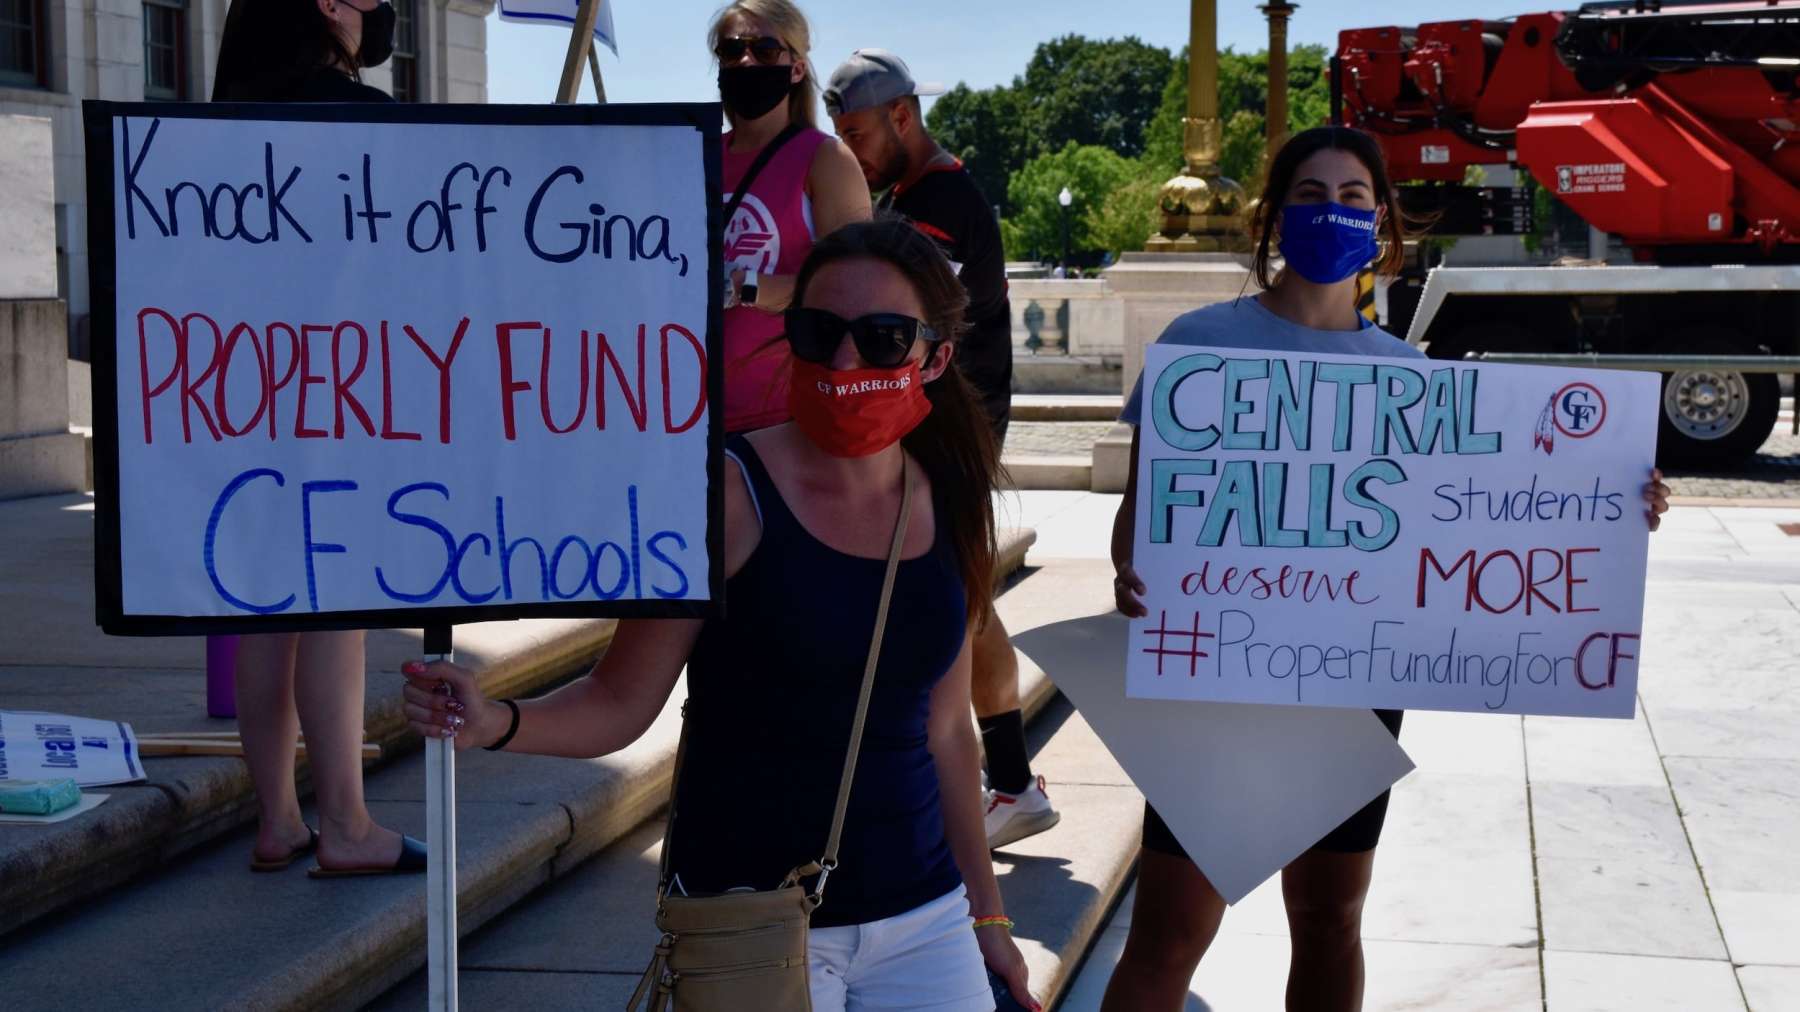 Education is Freedom! The Central Falls Rally to fund the schools